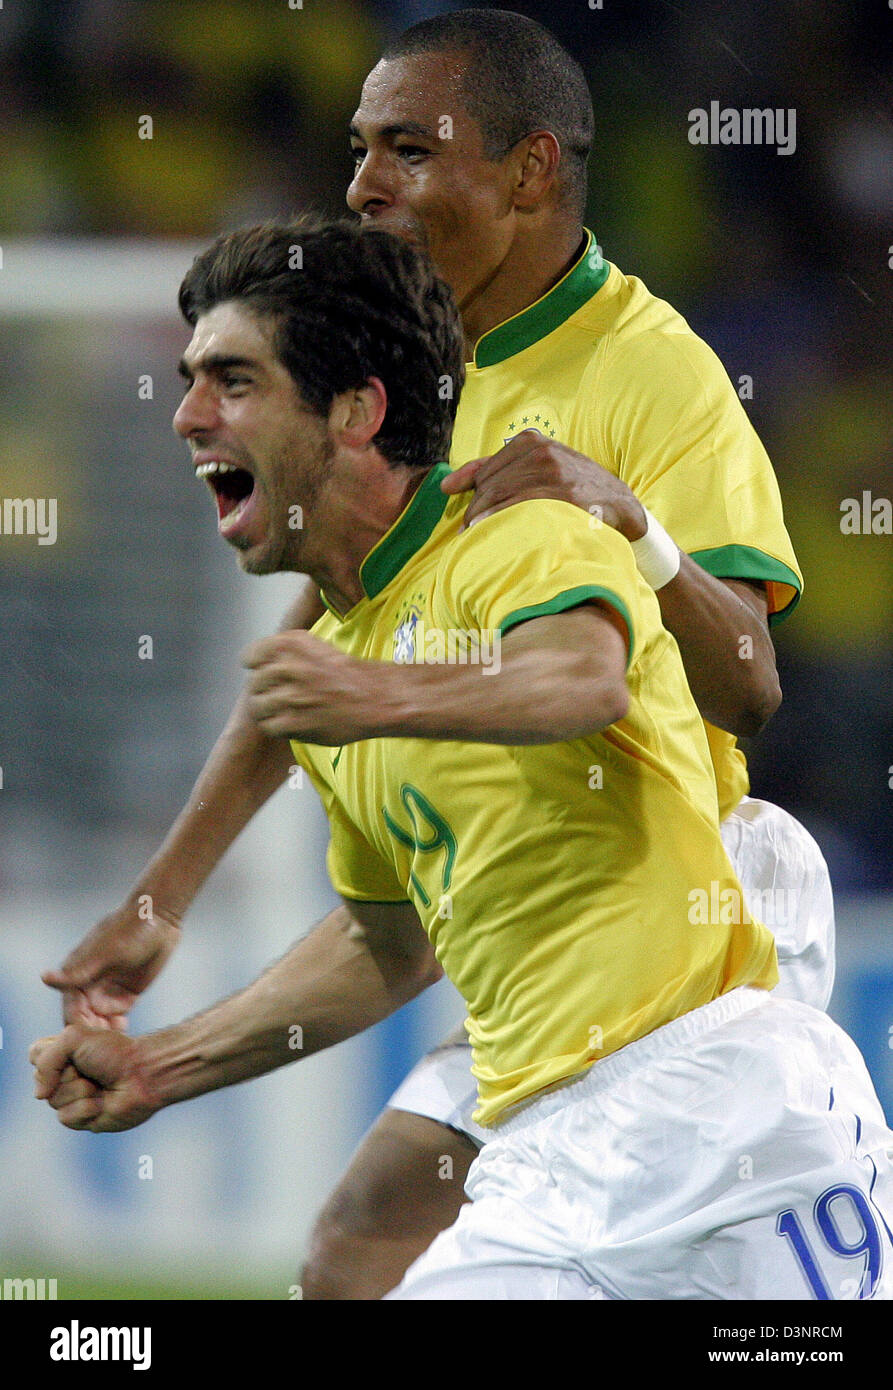 Juninho Pernambucano (L) from Brazil is celebrated by teammate Gilberto Silva after scoring the 2-1 lead against Japan during the group F match of 2006 FIFA World Cup between Japan and Brazil in Dortmund, Germany, Thursday 22 June 2006. DPA/BERND THISSEN +++ Mobile Services OUT +++ Please refer to FIFA's Terms and Conditions. Stock Photo